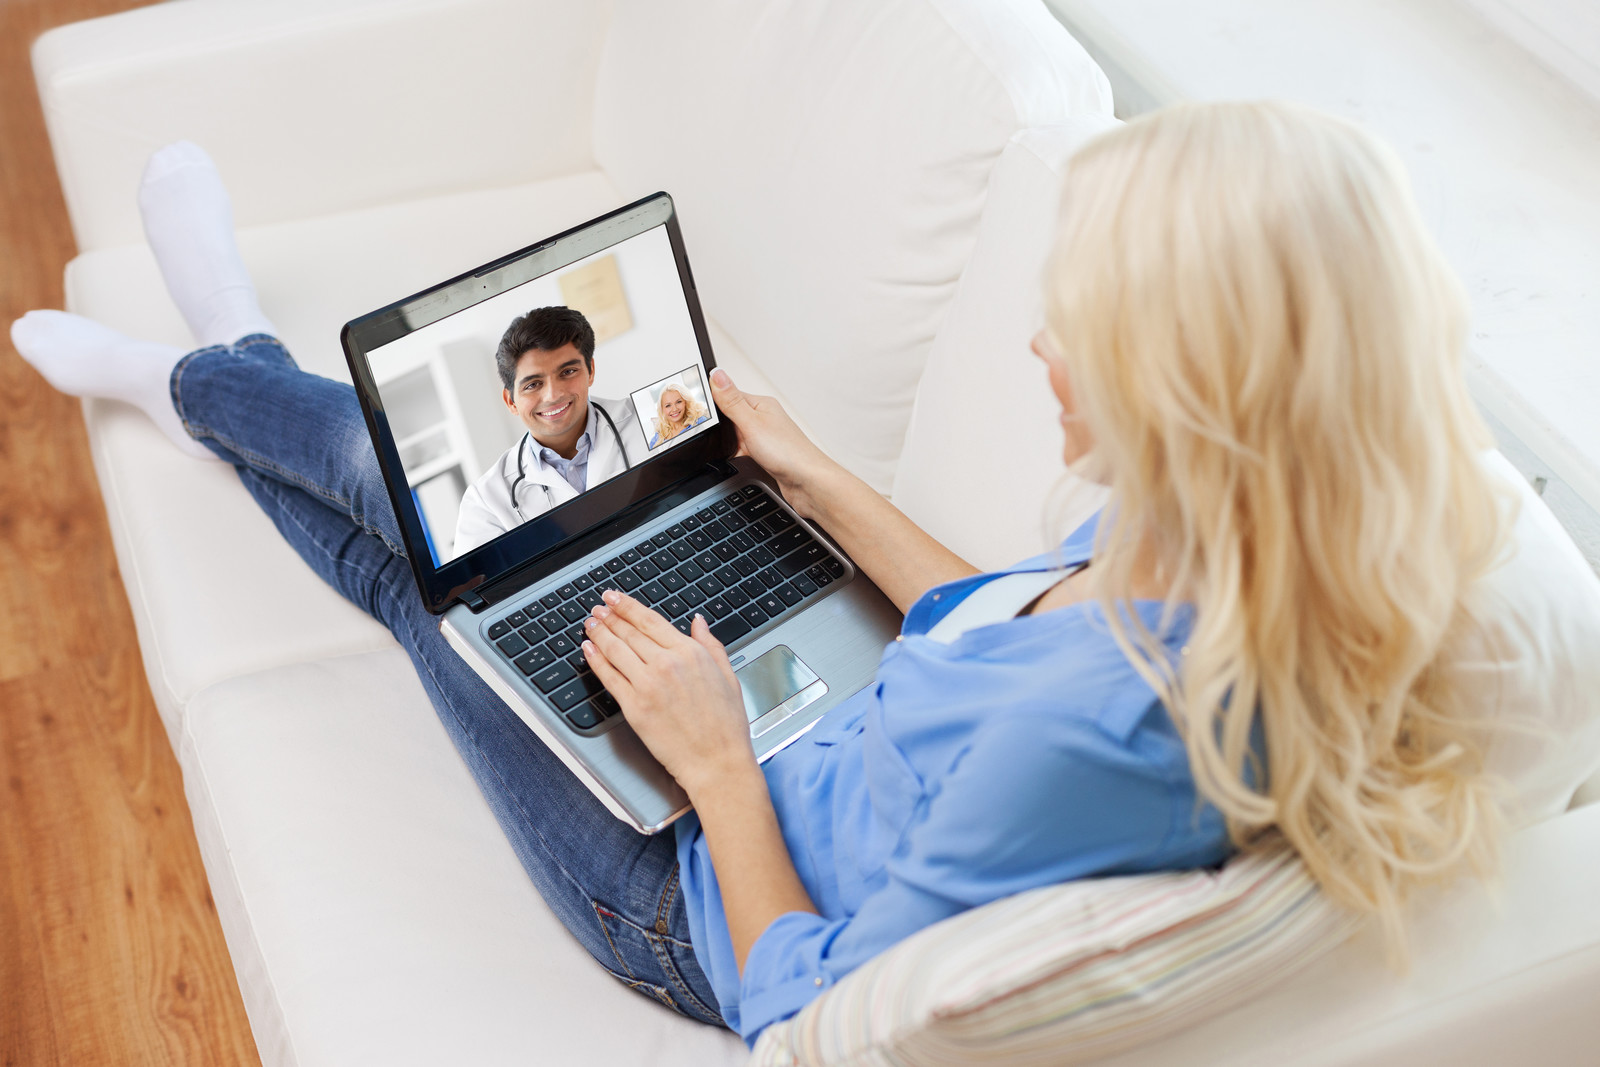 Engaged Patients Part II: Engaged Patients and Virtual Care